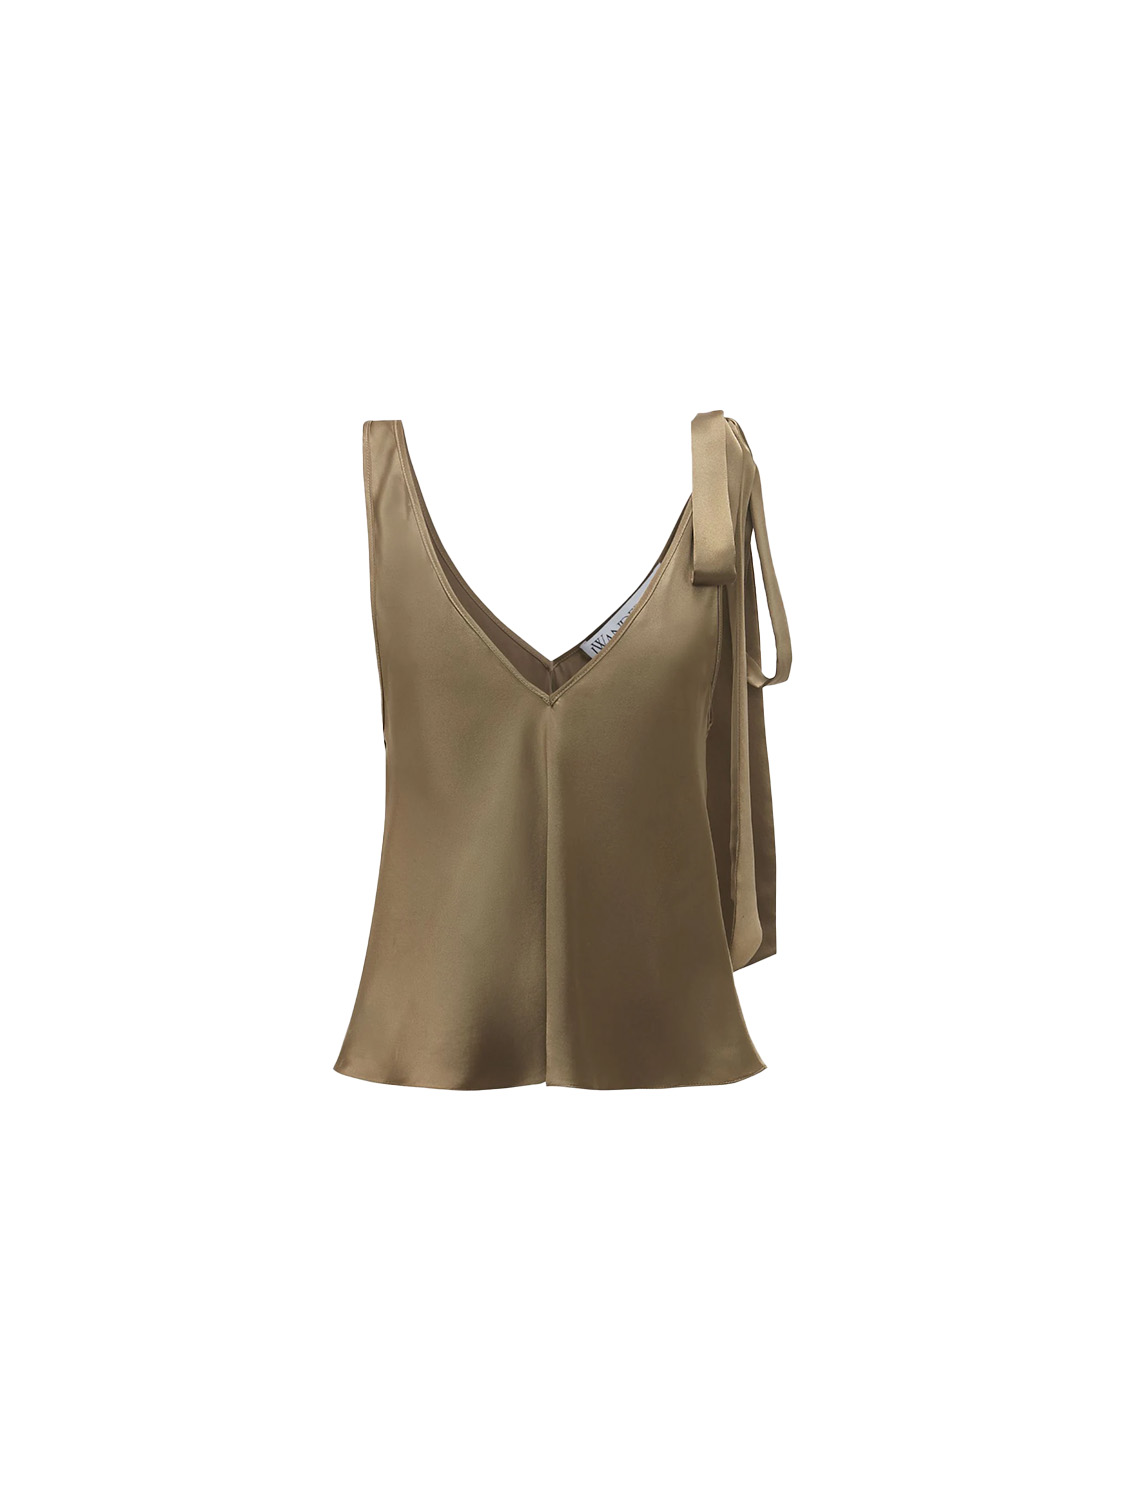 Satin top with bow detail 